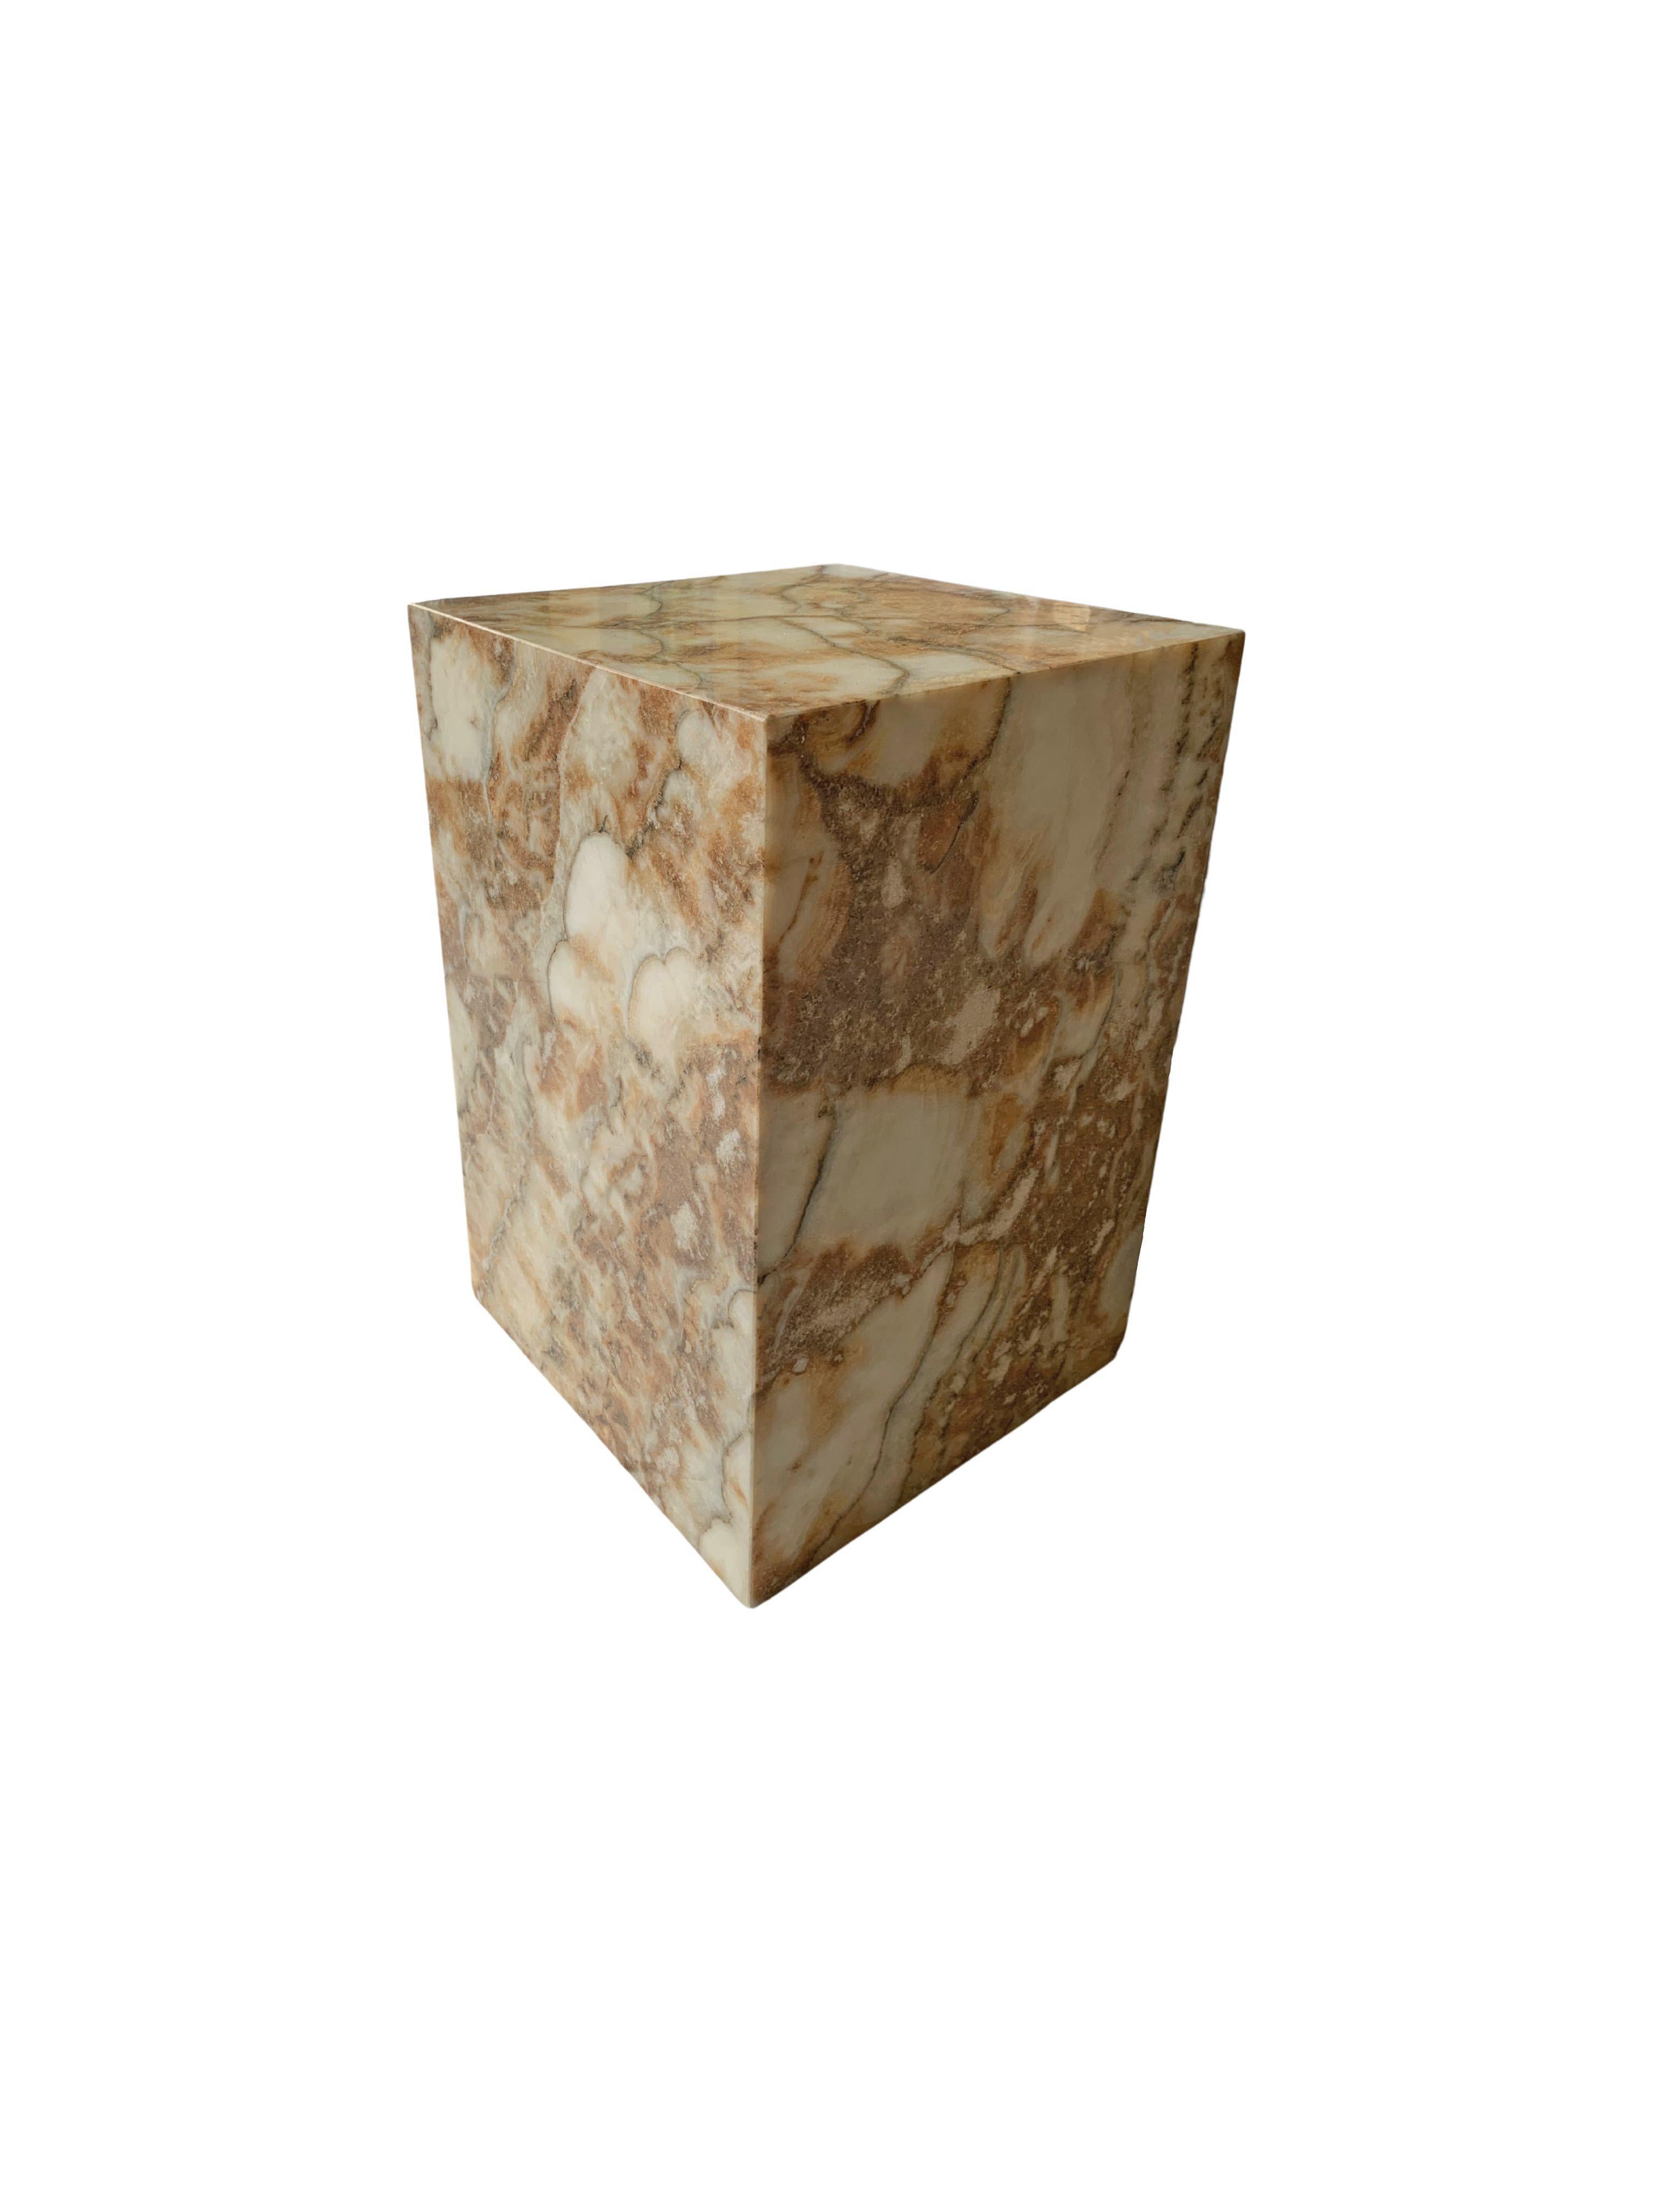 An onyx marble side table or pedestal with wonderful textures and shades. Hand-crafted by local artisans on the island of Java, this is a wonderful object to bring warmth to any space. It is hollow at its center, this is highlighted in the last